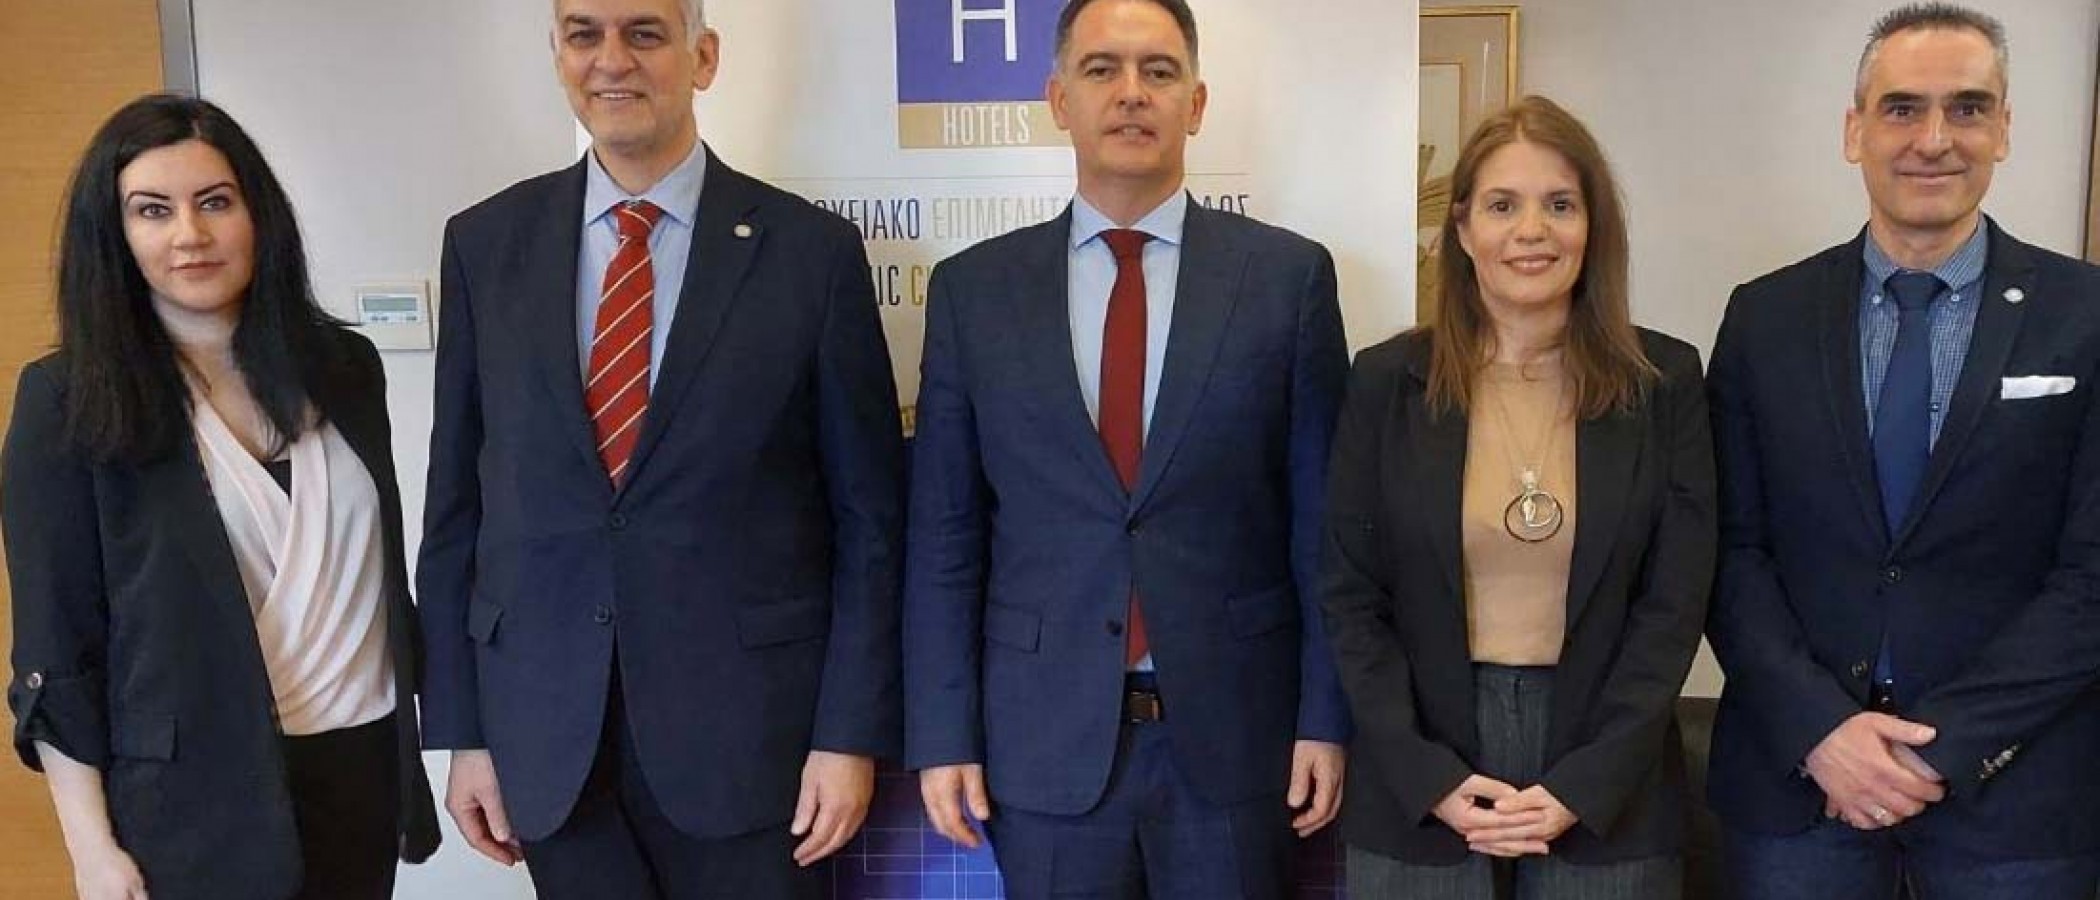 The Agricultural University of Athens acts as a scientific partner of the Hellenic Chamber of Hotels